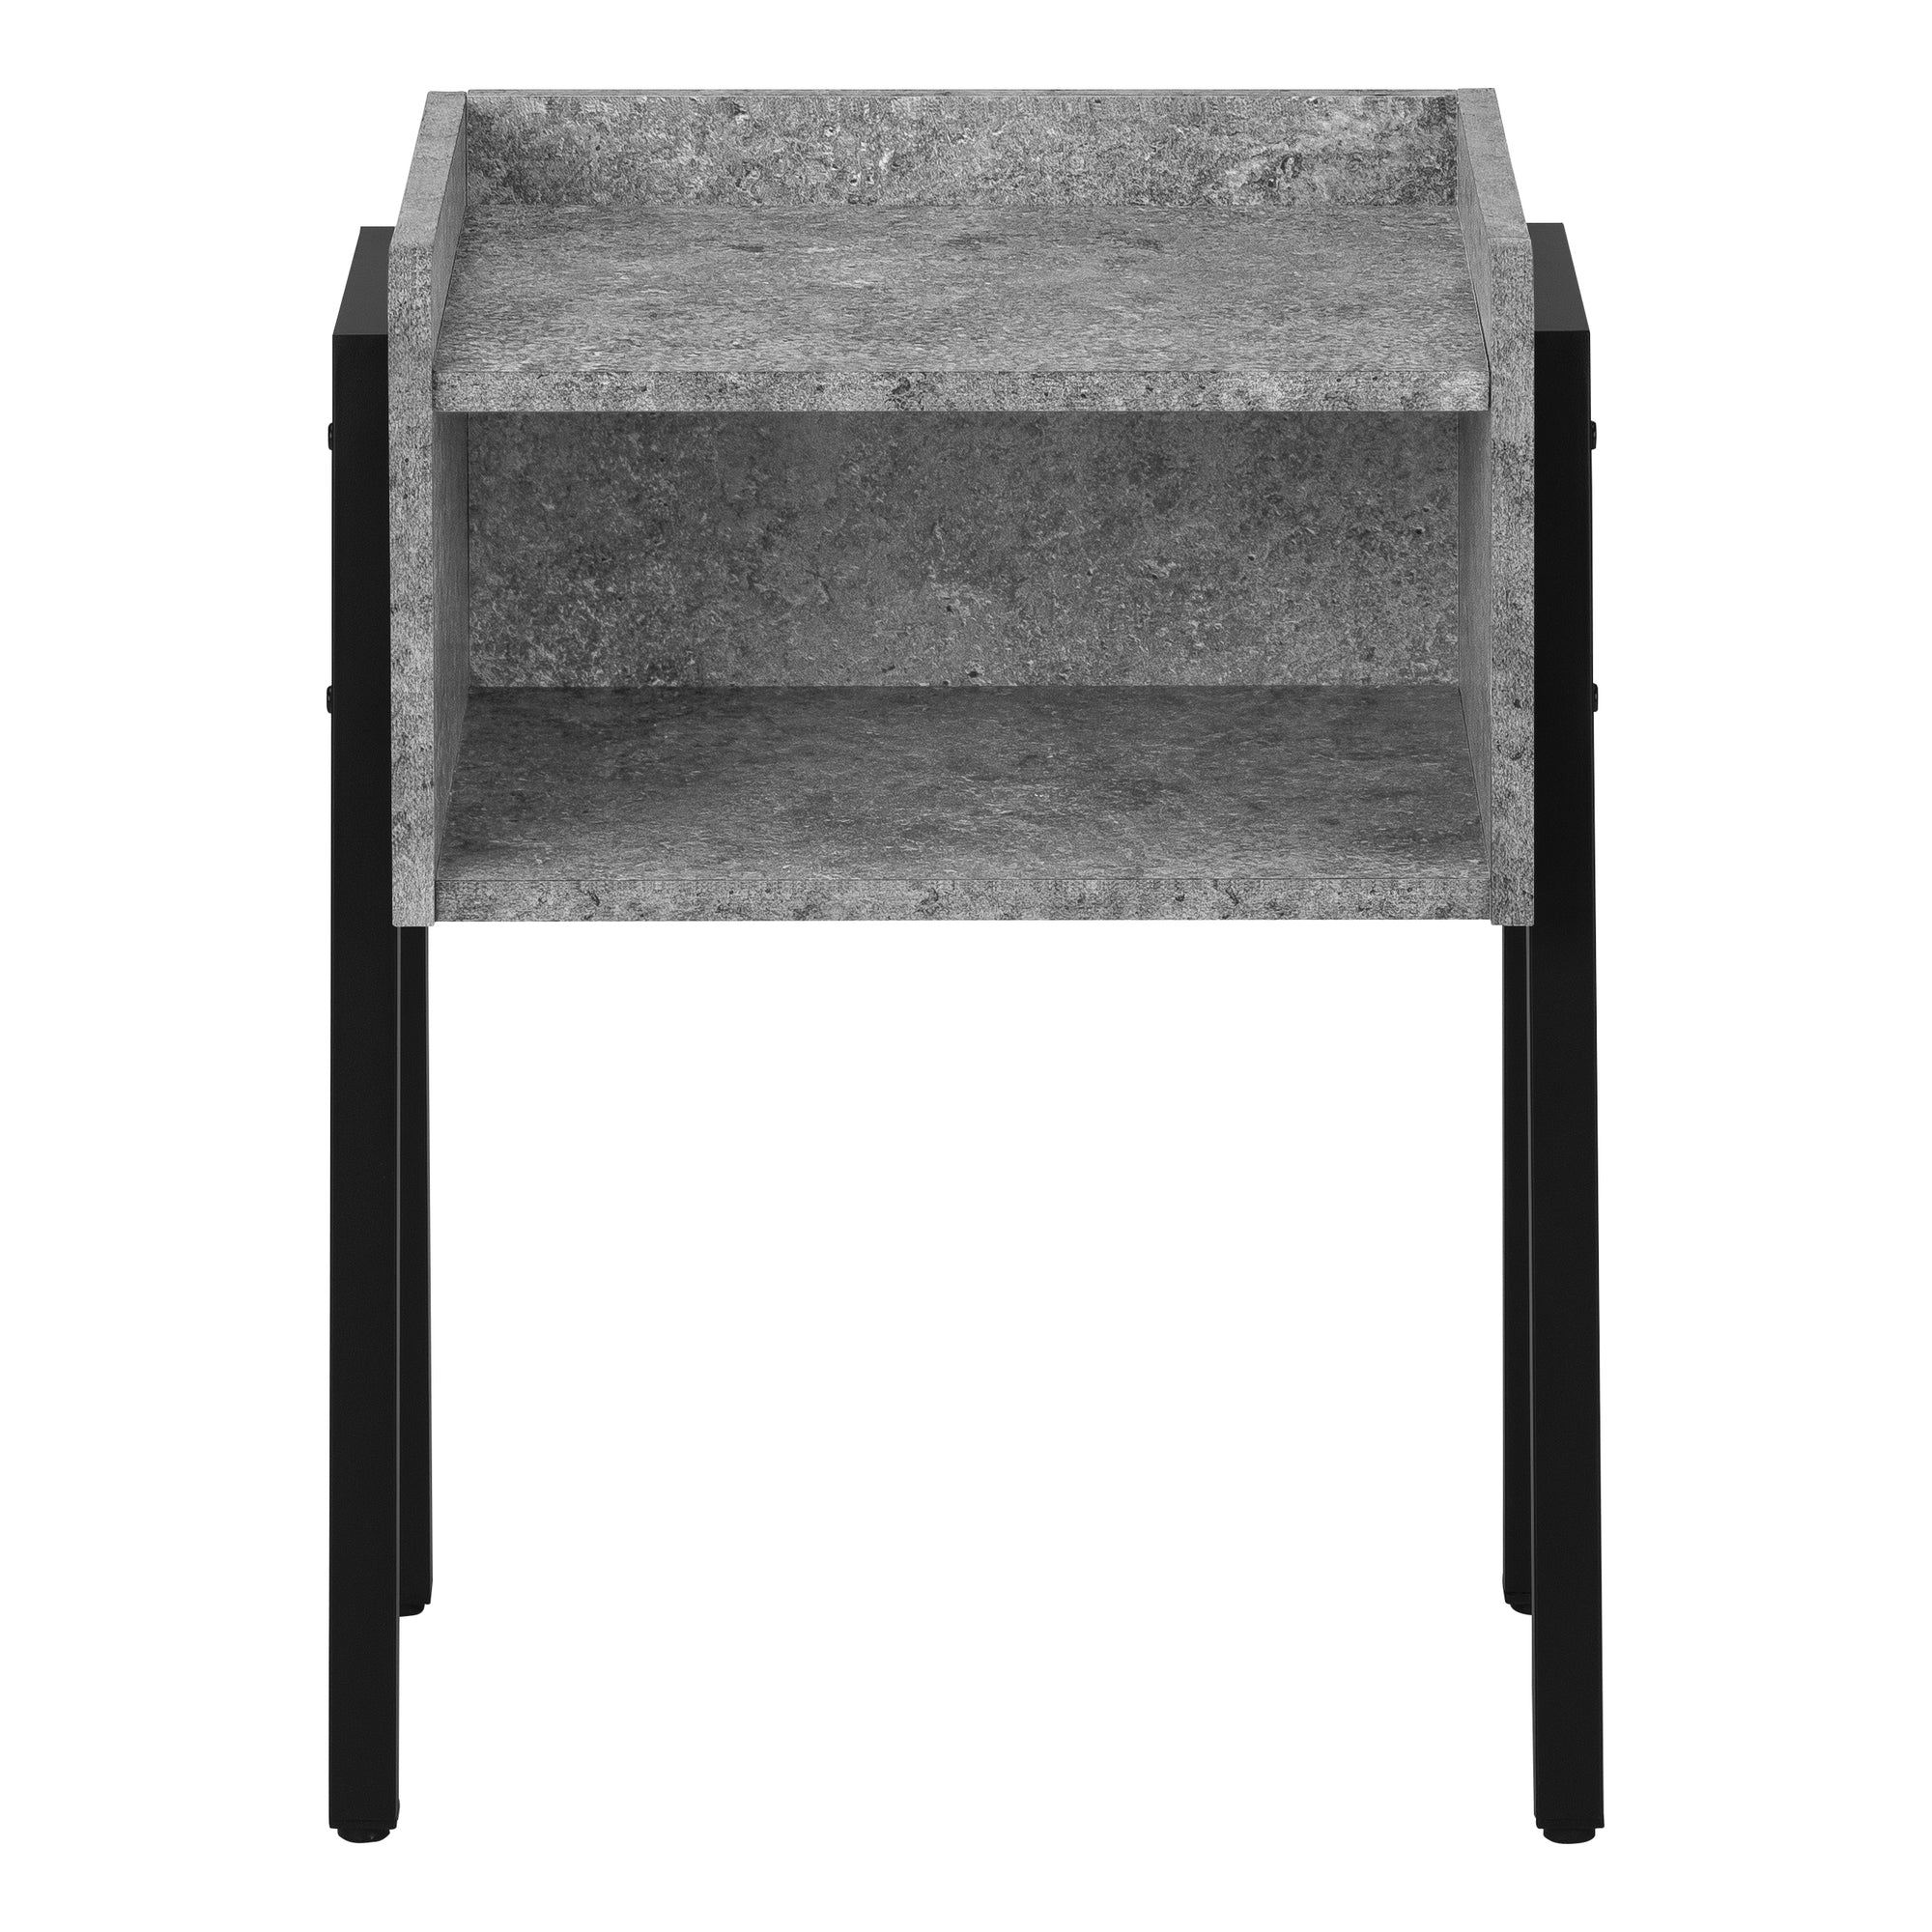 MN-473584    Accent Table, Side, End, Nightstand, Lamp, Living Room, Bedroom, Metal Legs, Laminate, Grey Stone Look, Black, Contemporary, Modern